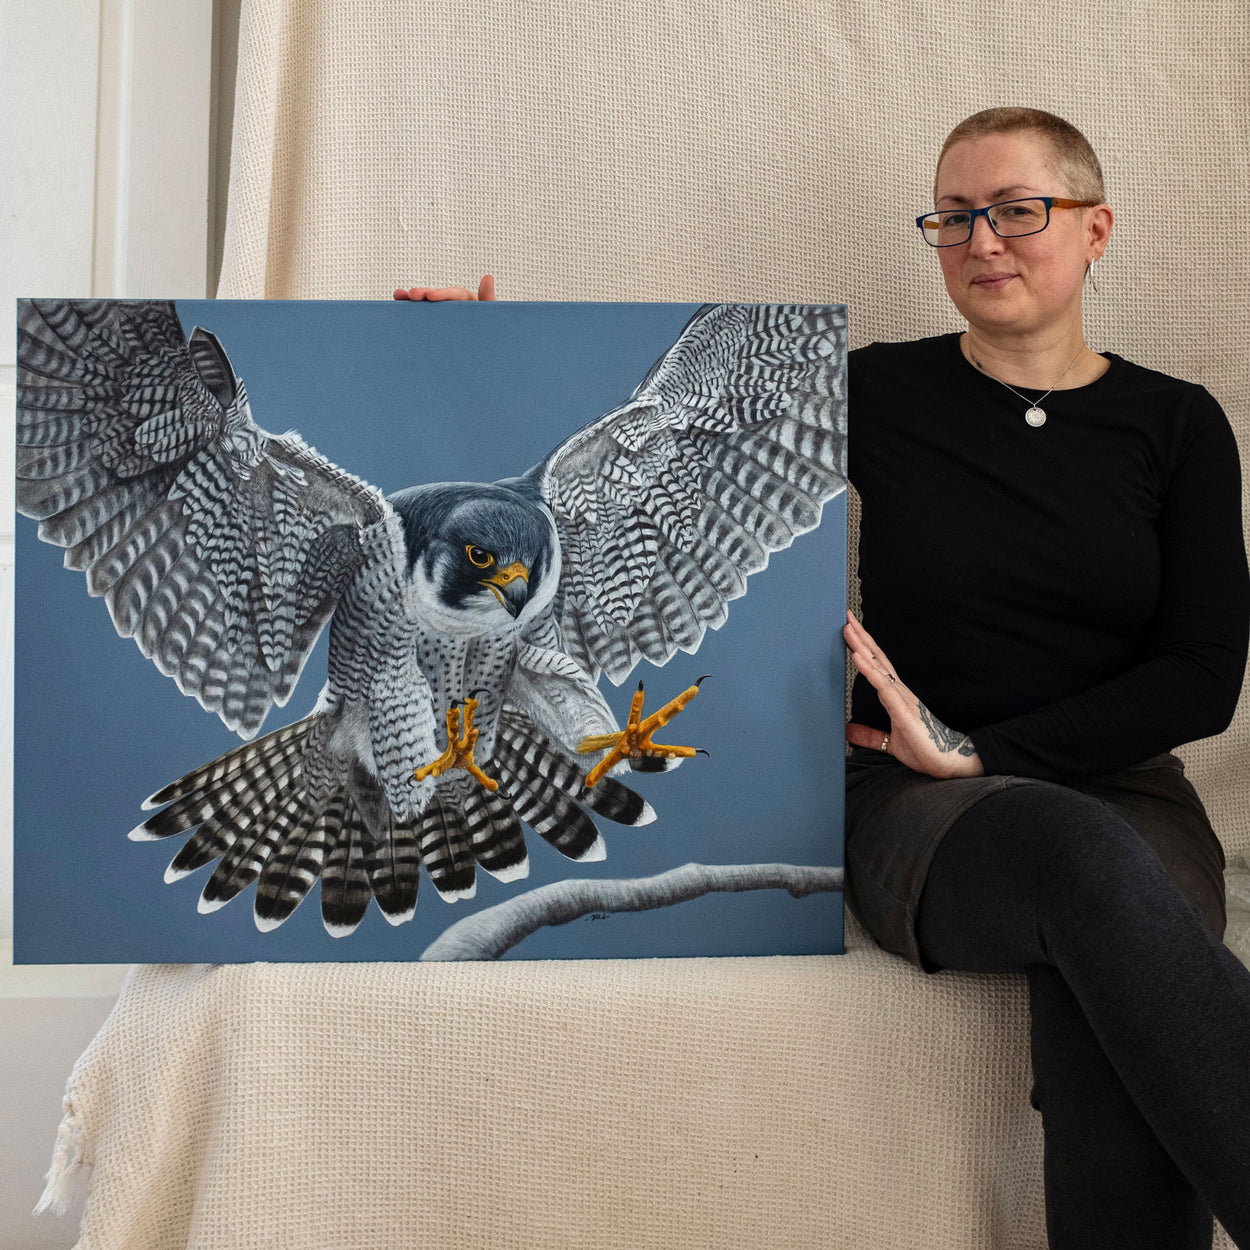 Bird of prey artist Jill Dimond sitting next to the original painting of a flying peregrine